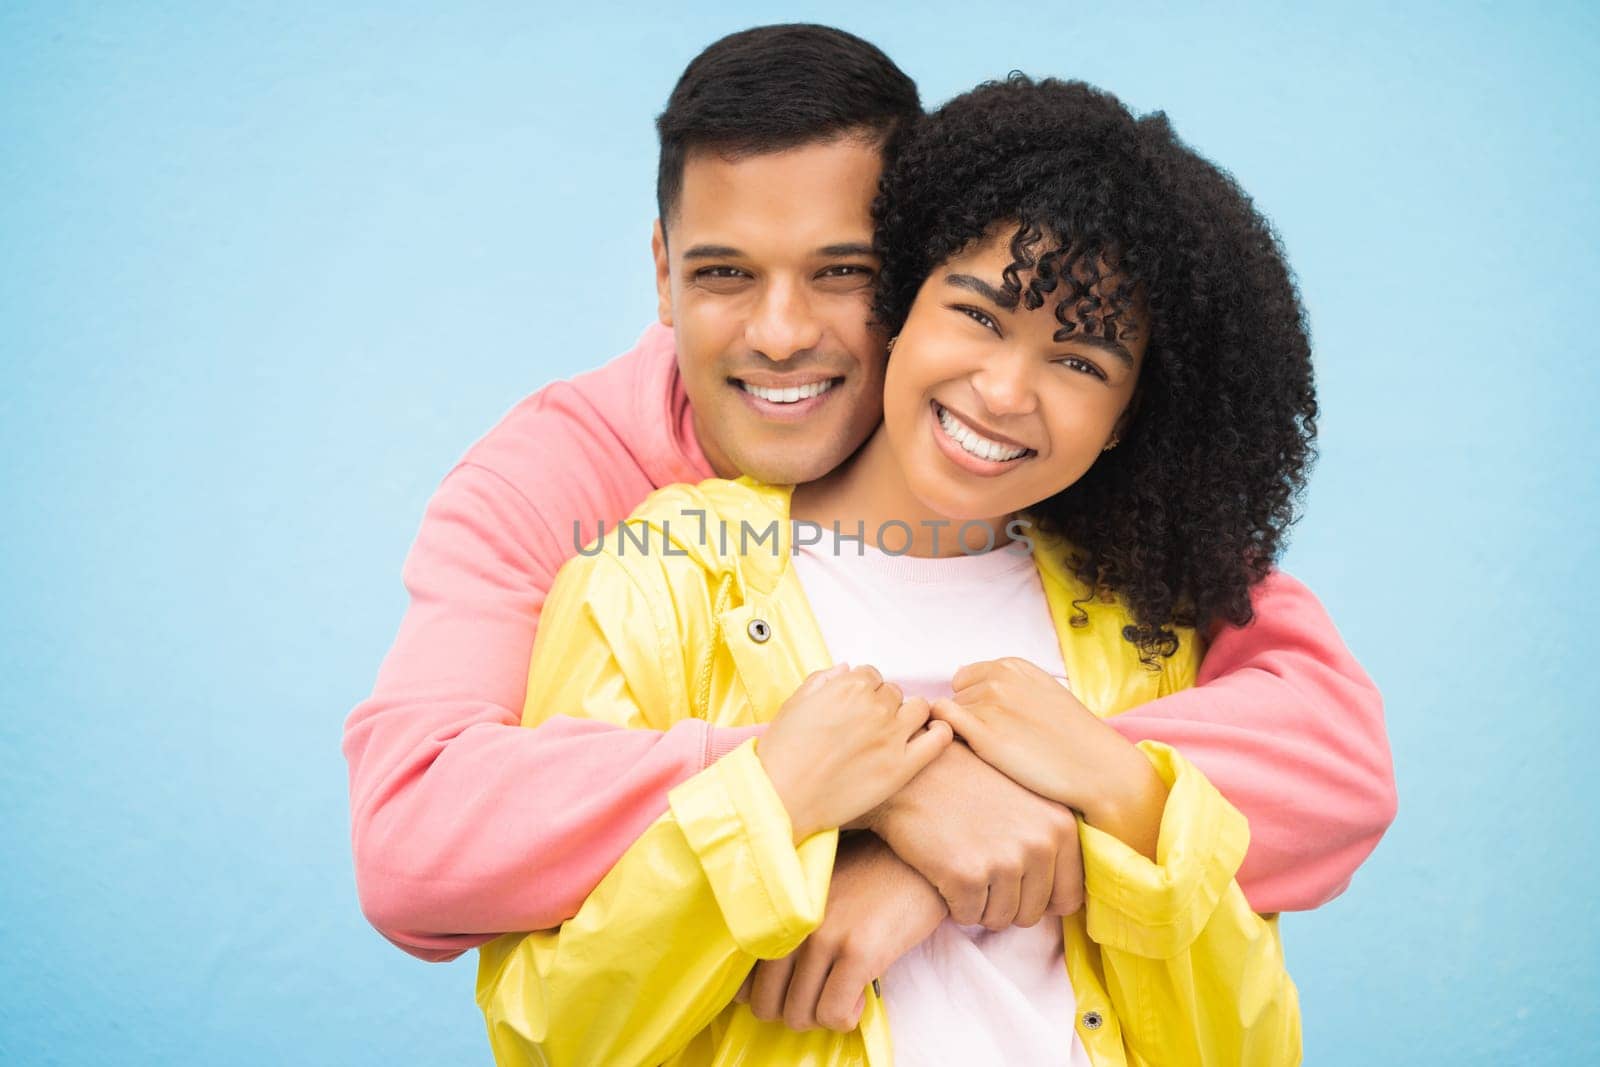 Happy people, smile and hug in portrait with couple in love, commitment isolated on blue background. Interracial relationship mockup, commitment and together in studio with black woman, man and trust.